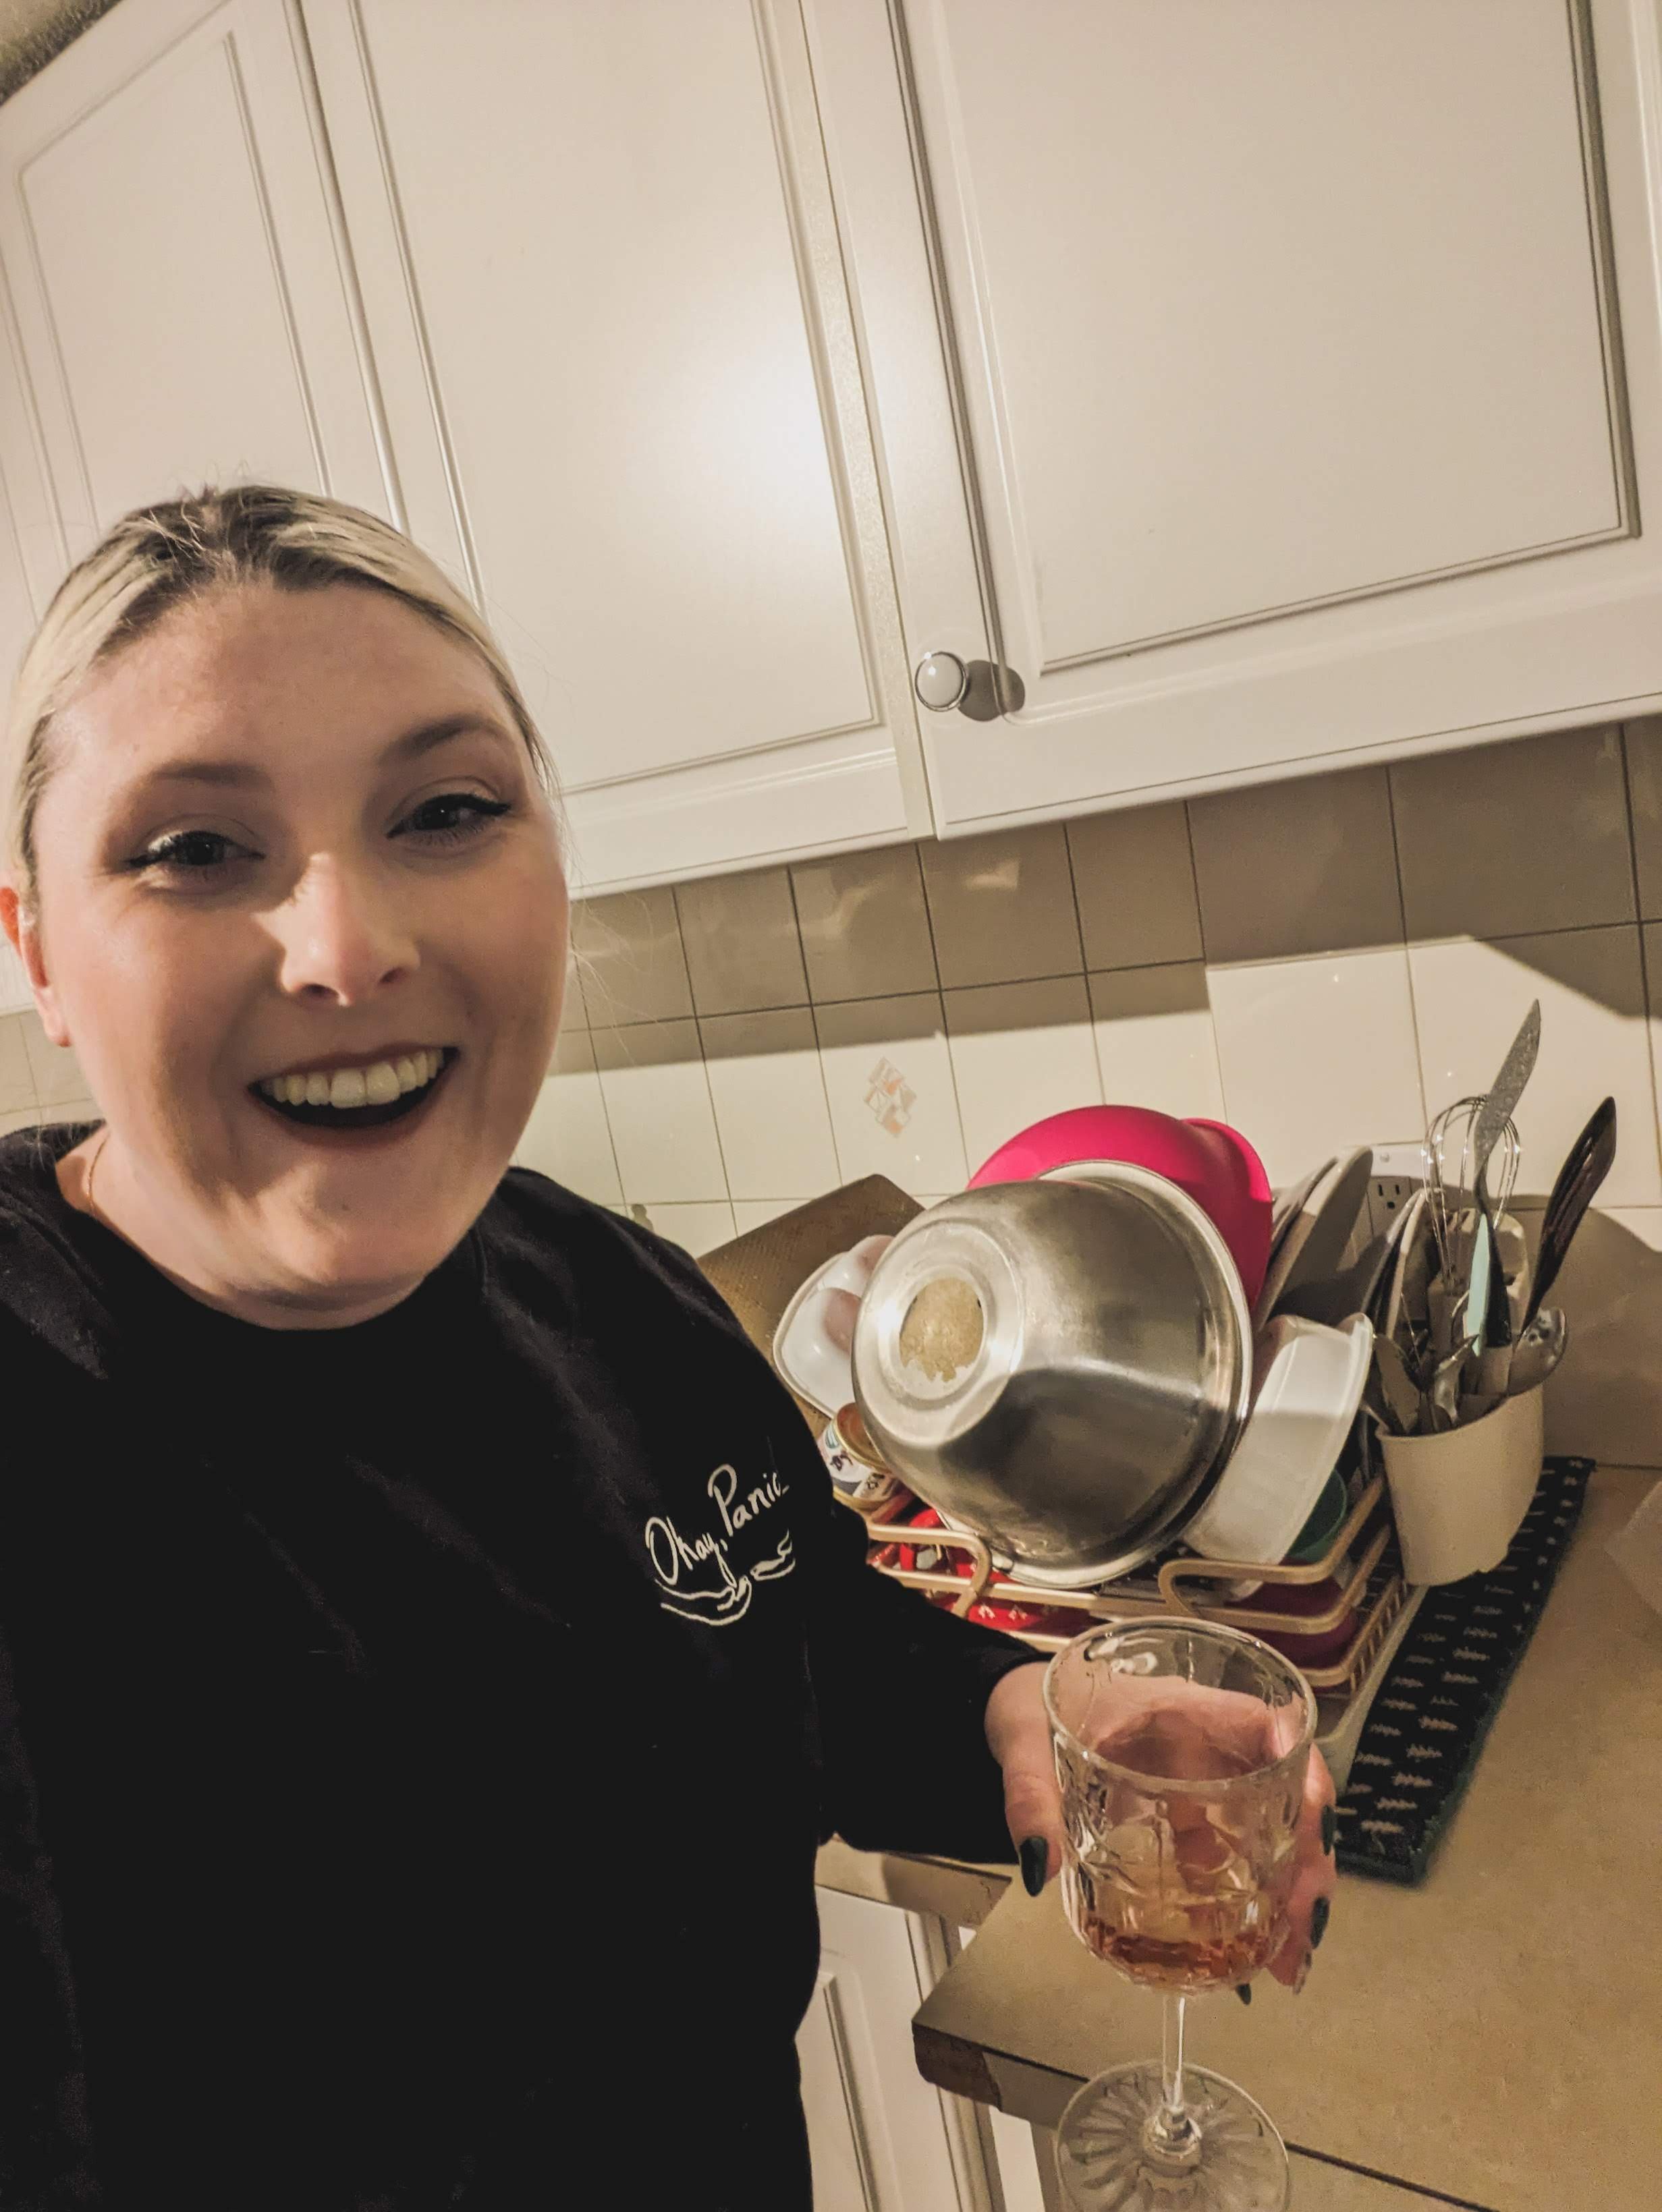  I felt like I didn’t have enough pictures so I just started taking selfie’s so here is me in front of the dishes that I finally did because I finally bought dish soap. Being a grown up is hard ok? 